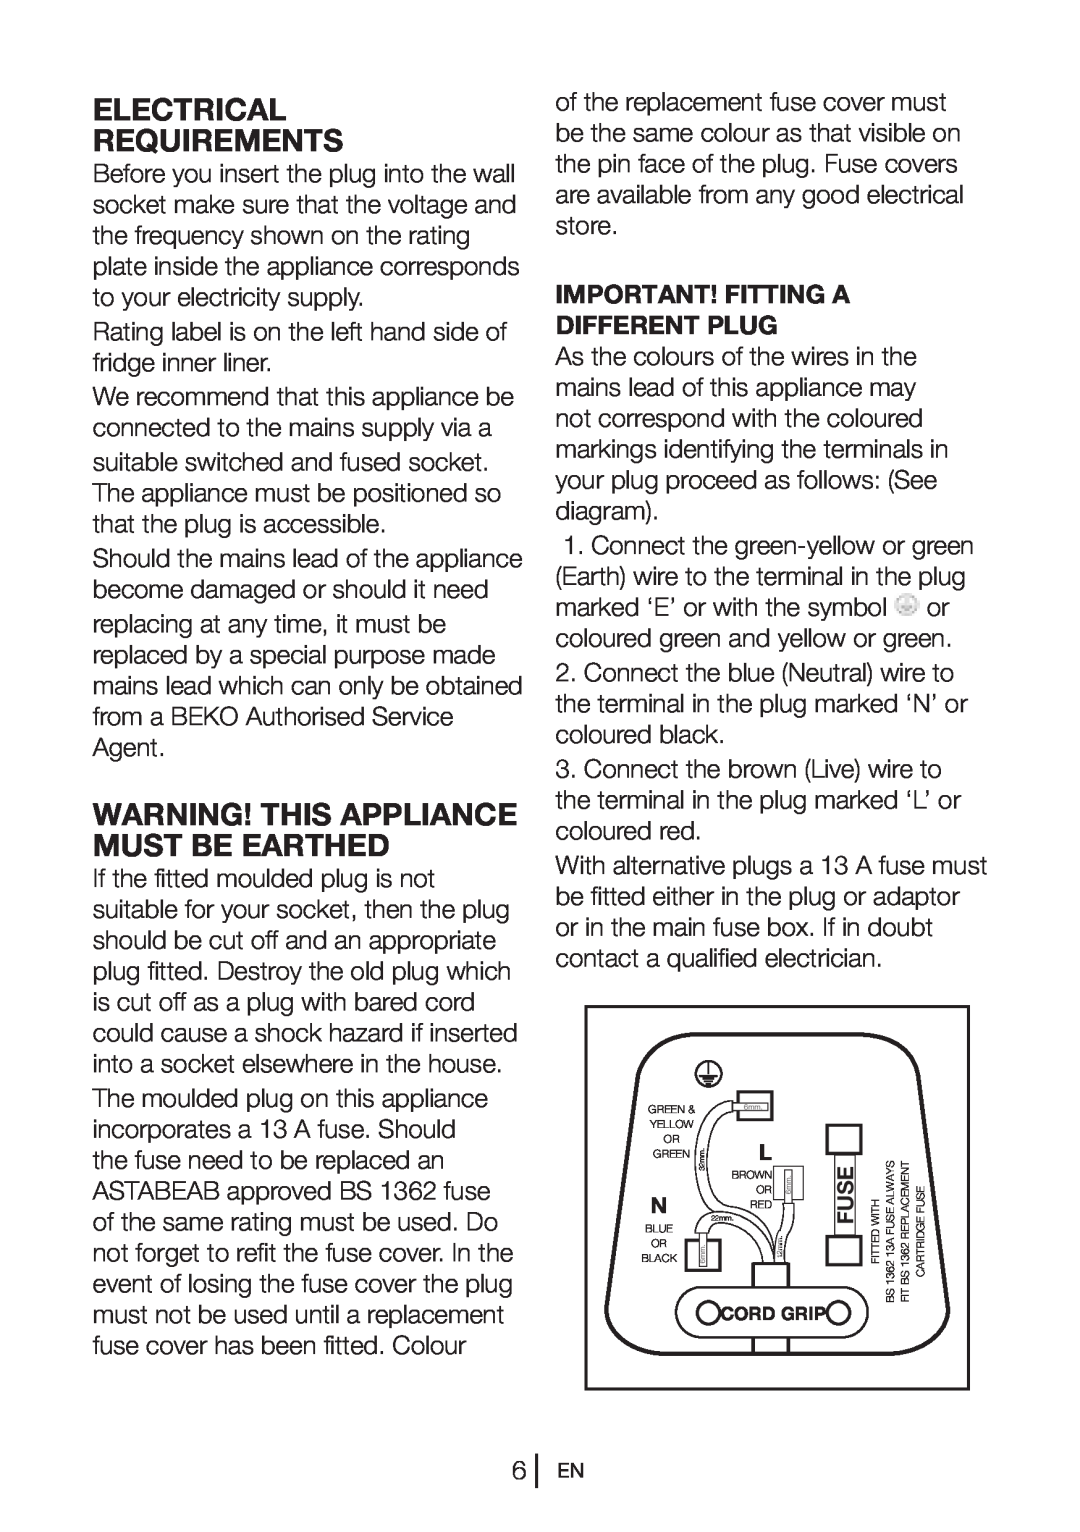 Beko CFD6914S manual Electrical Requirements, Warning! This Appliance Must Be Earthed, Important! Fitting A Different Plug 